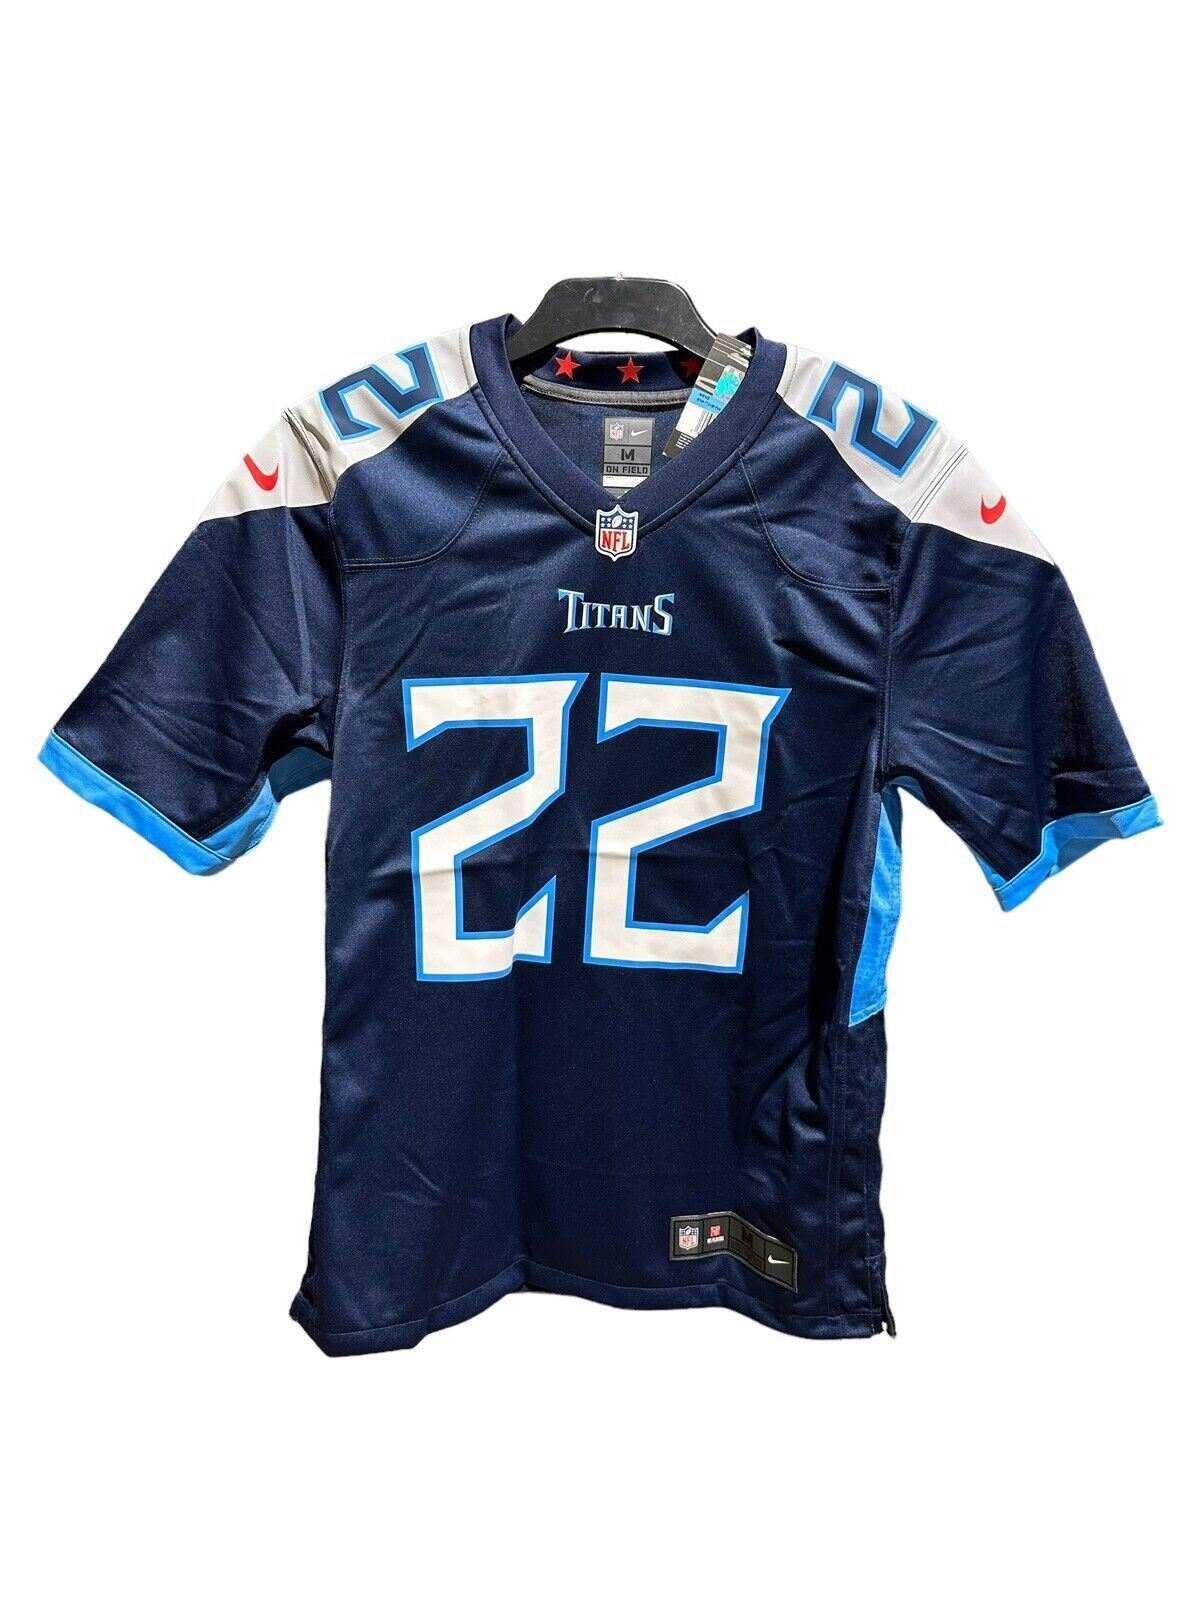 Nike NFL Tennesse Titans Game Jersey HENRY 22 Mens Size Medium